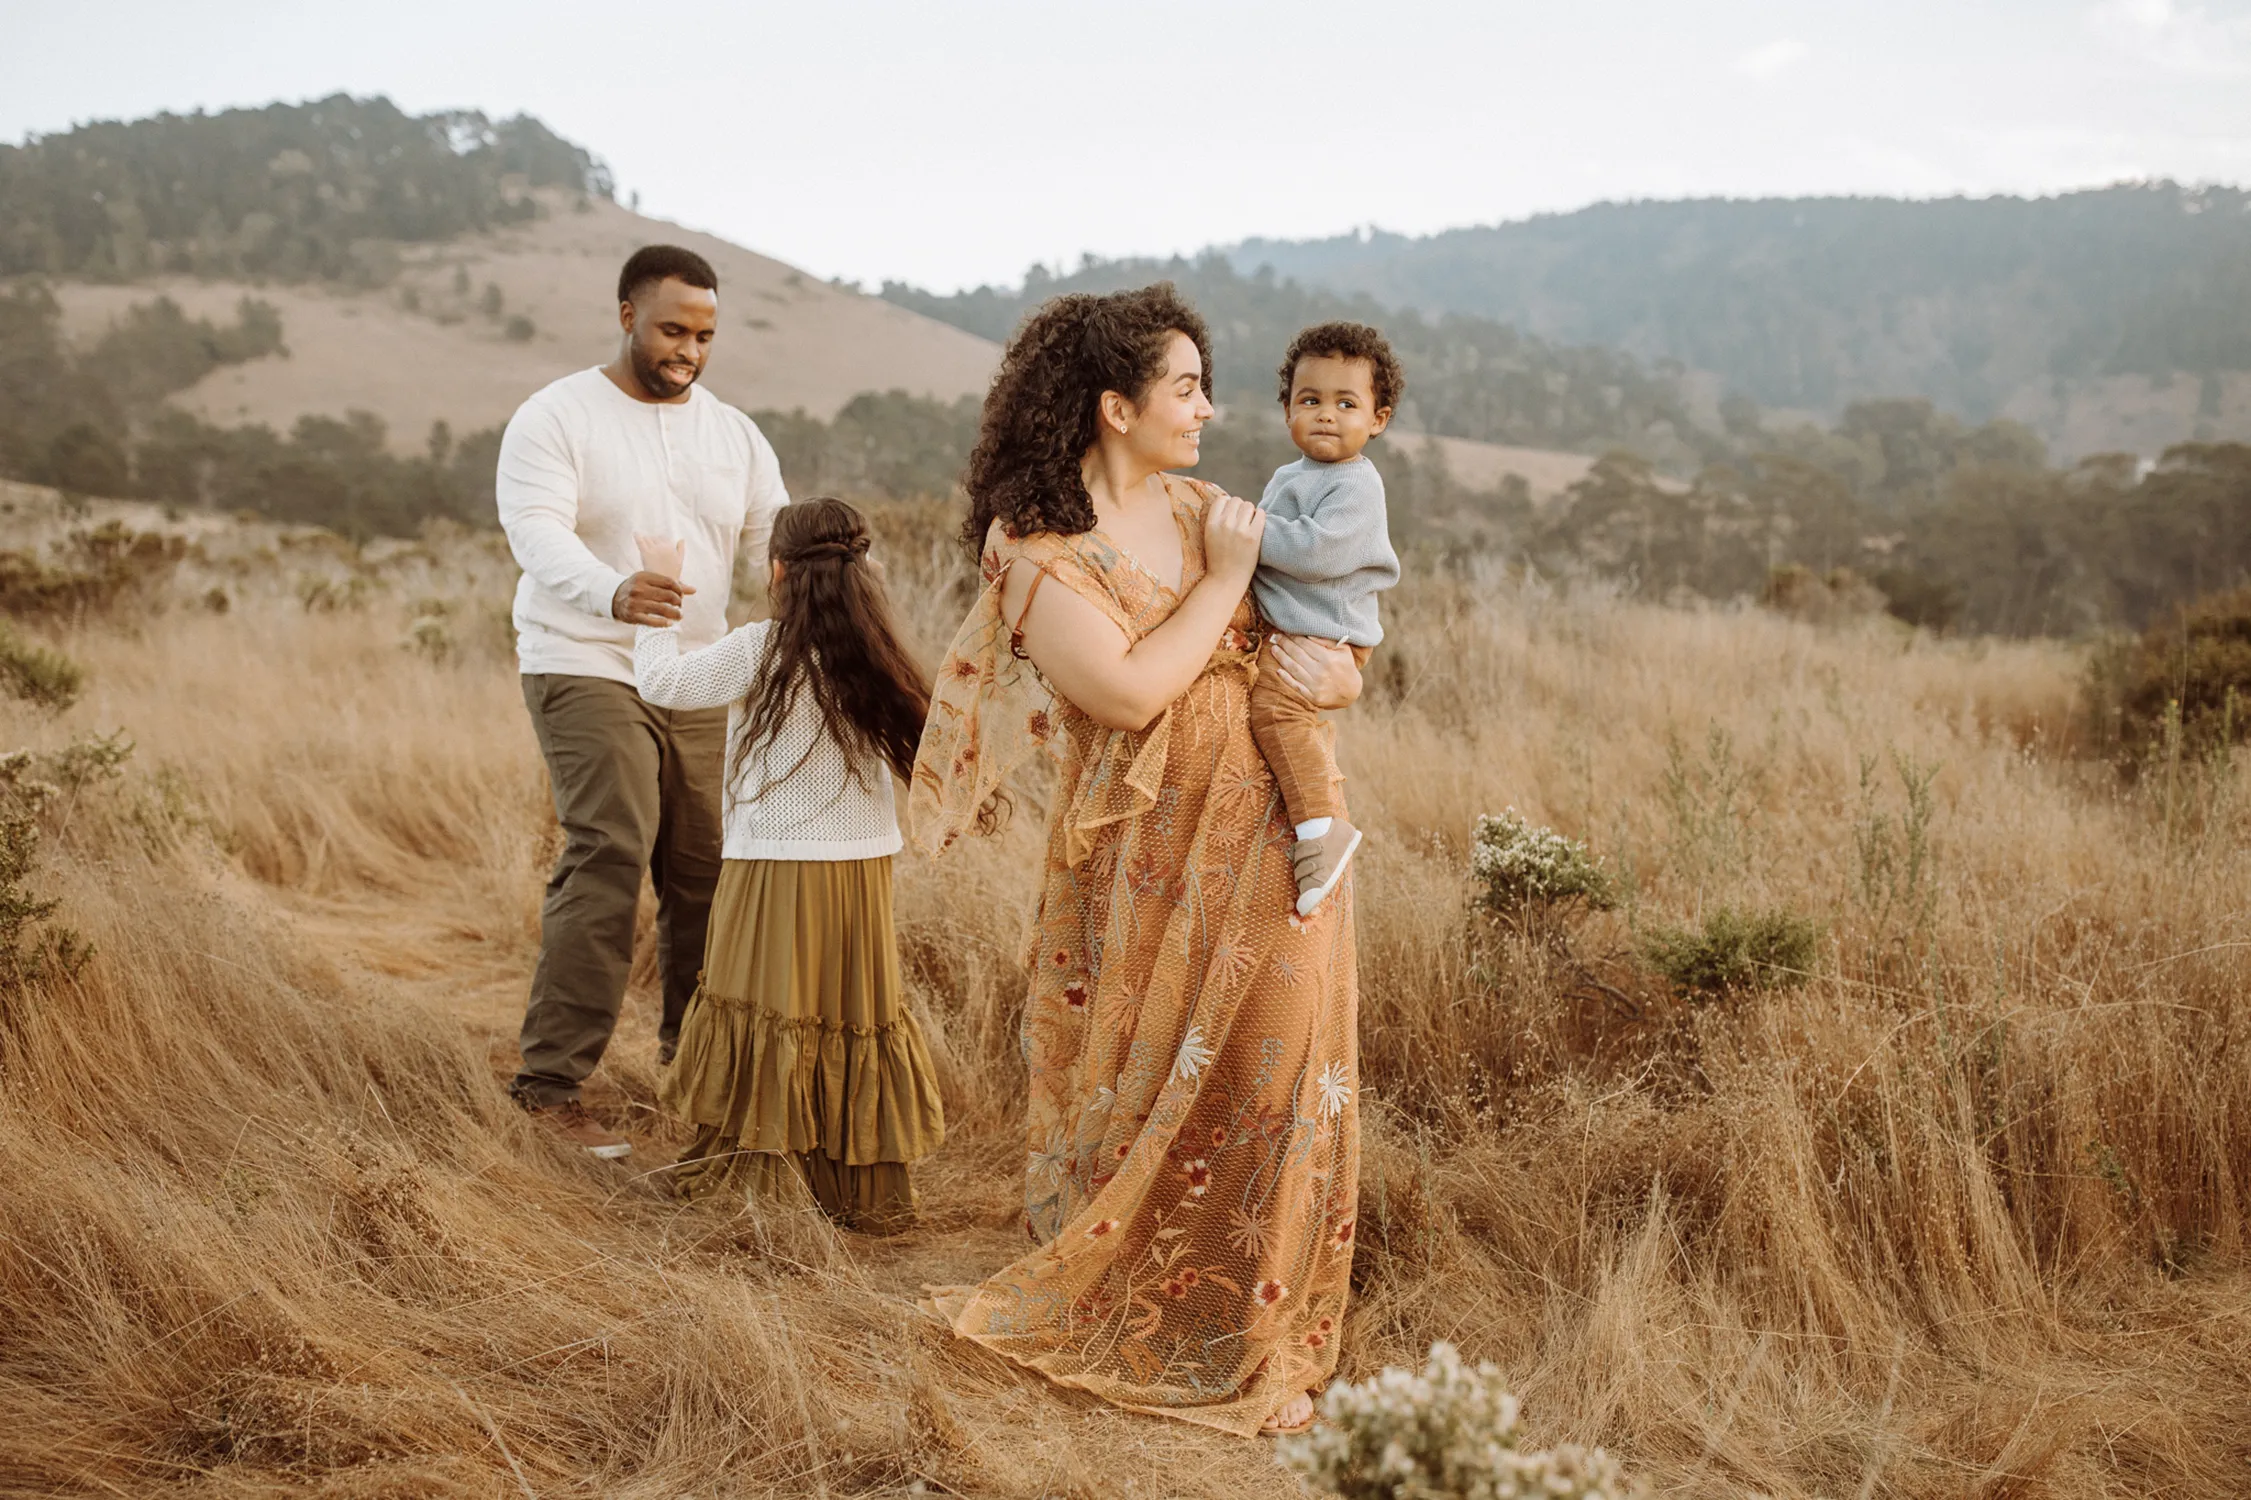 A family enjoying a serene moment in a golden field, with the focus on a woman in a patterned dress holding a toddler, as a man engages with a young girl, showcasing the Meridian Presets deal of the month ambiance.